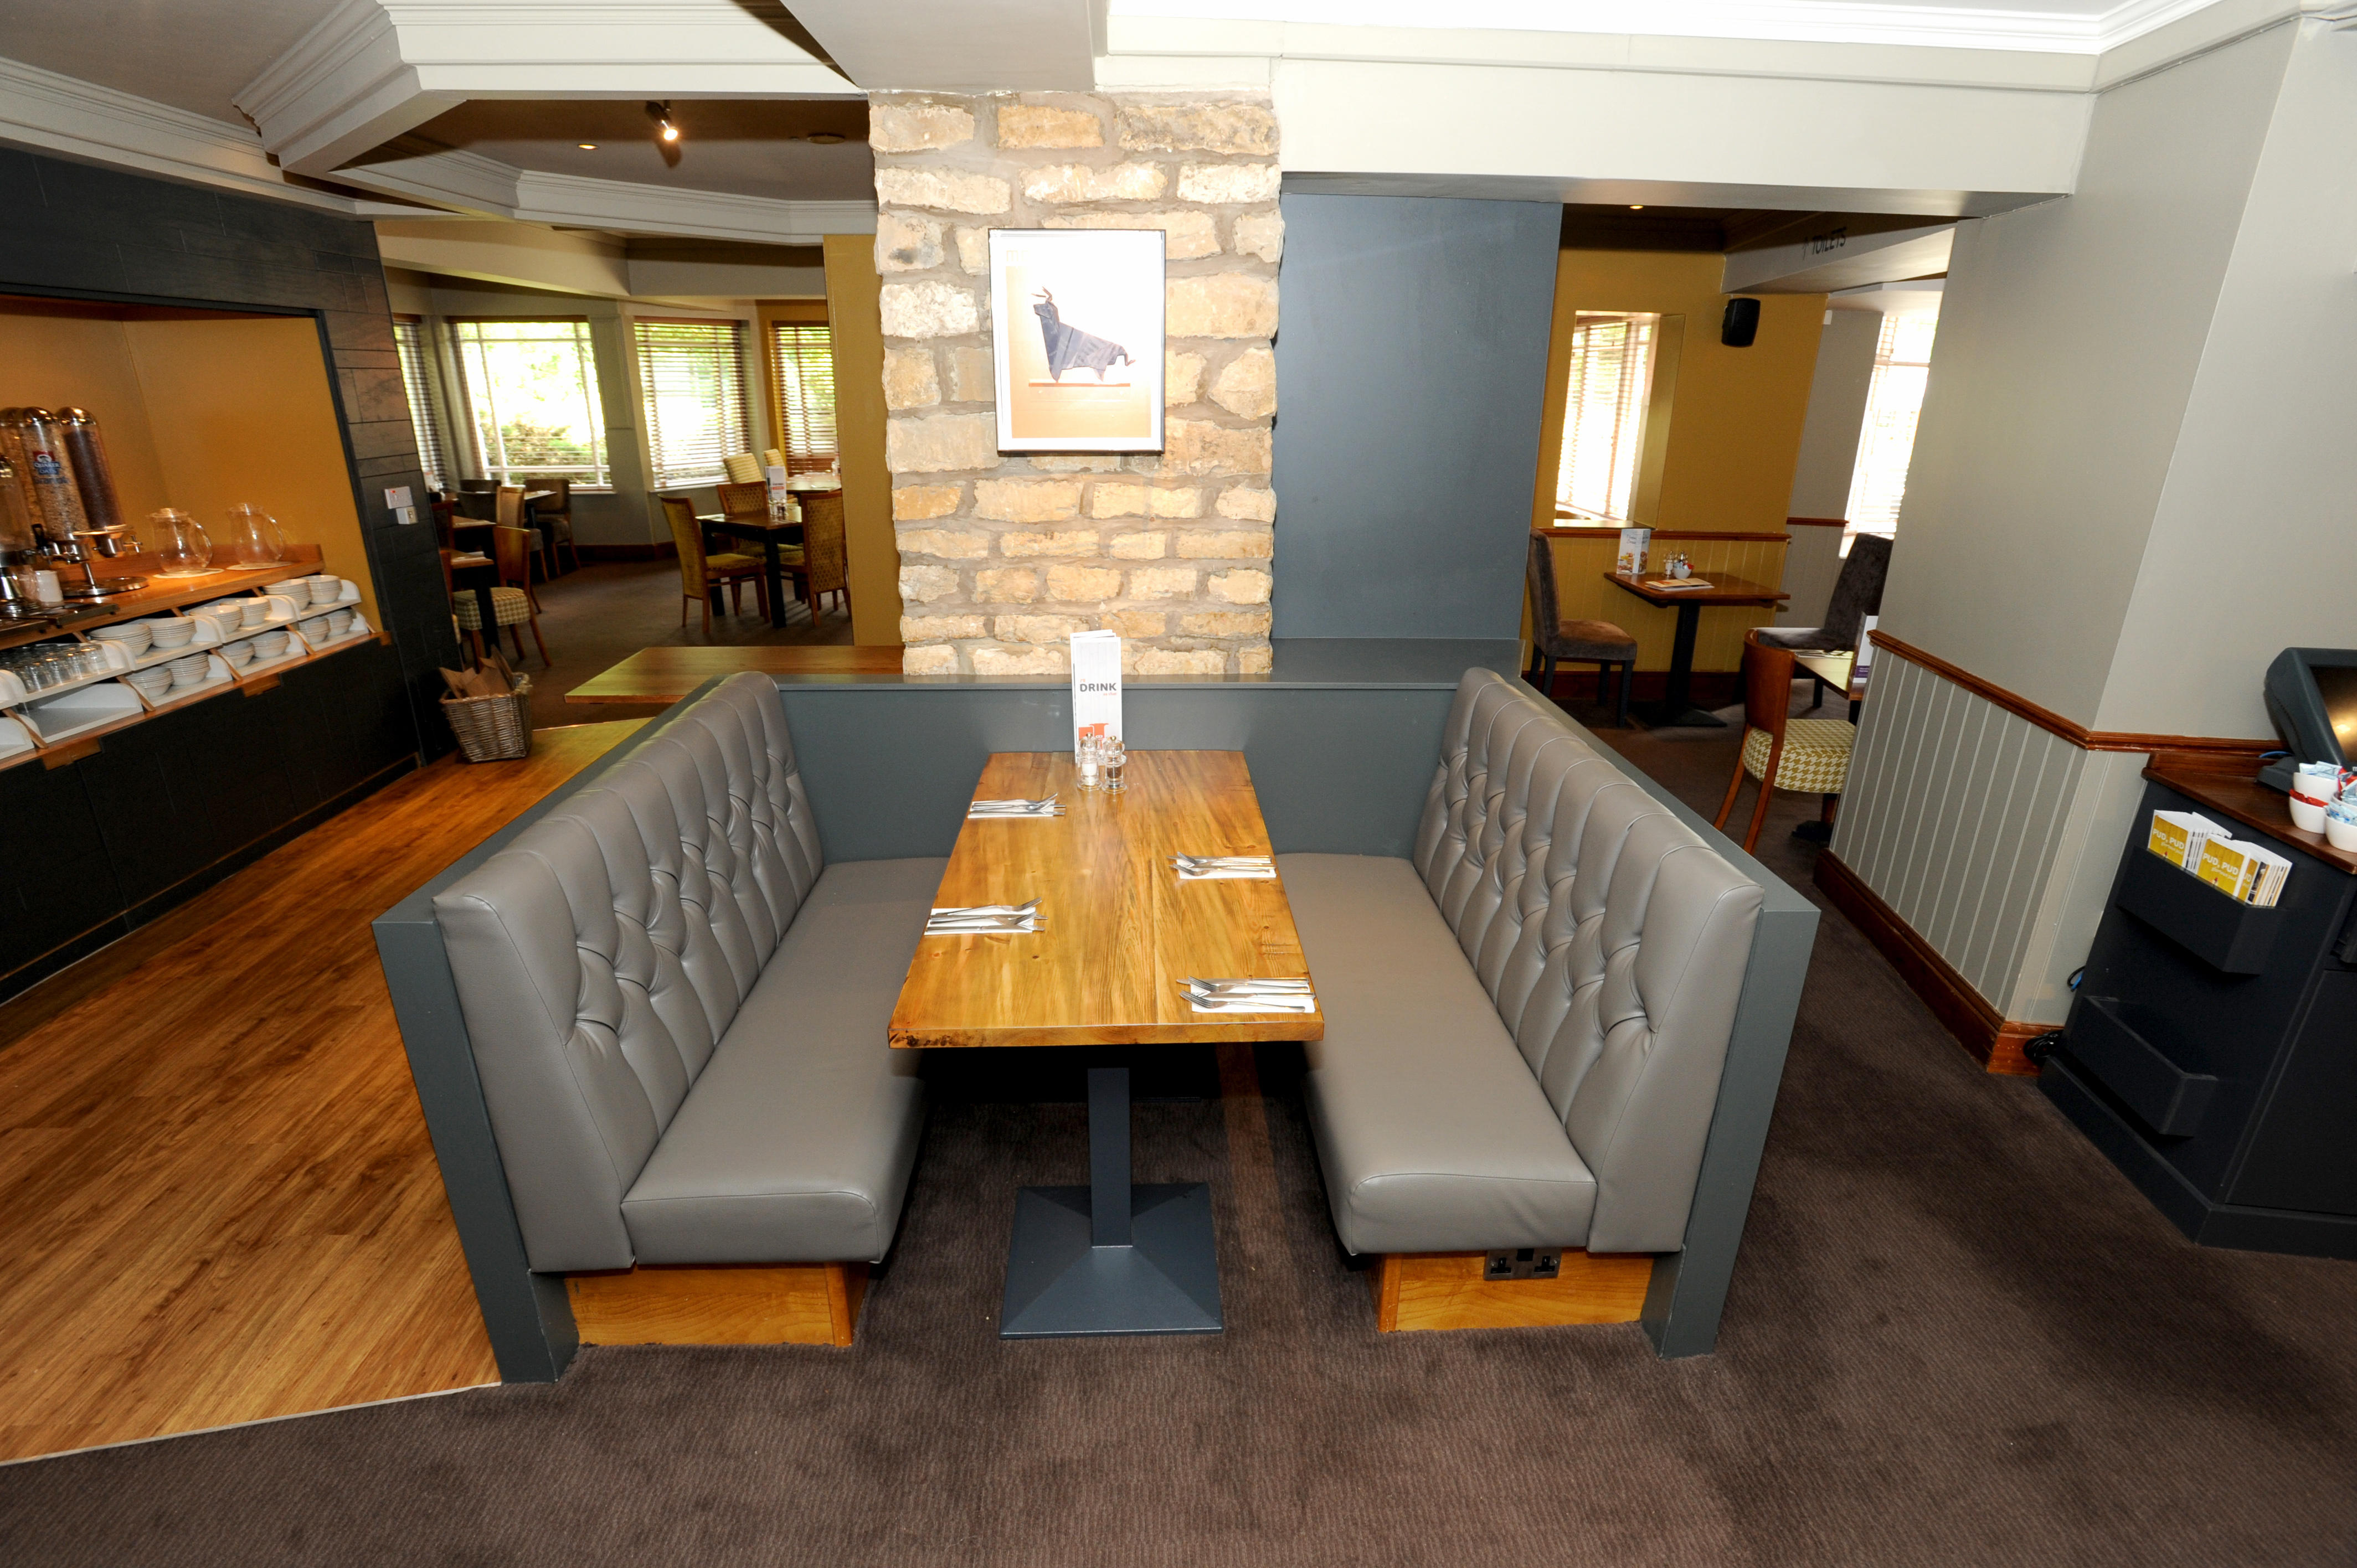 Mill Lodge Beefeater Restaurant Mill Lodge Beefeater Lincoln 01522 525216